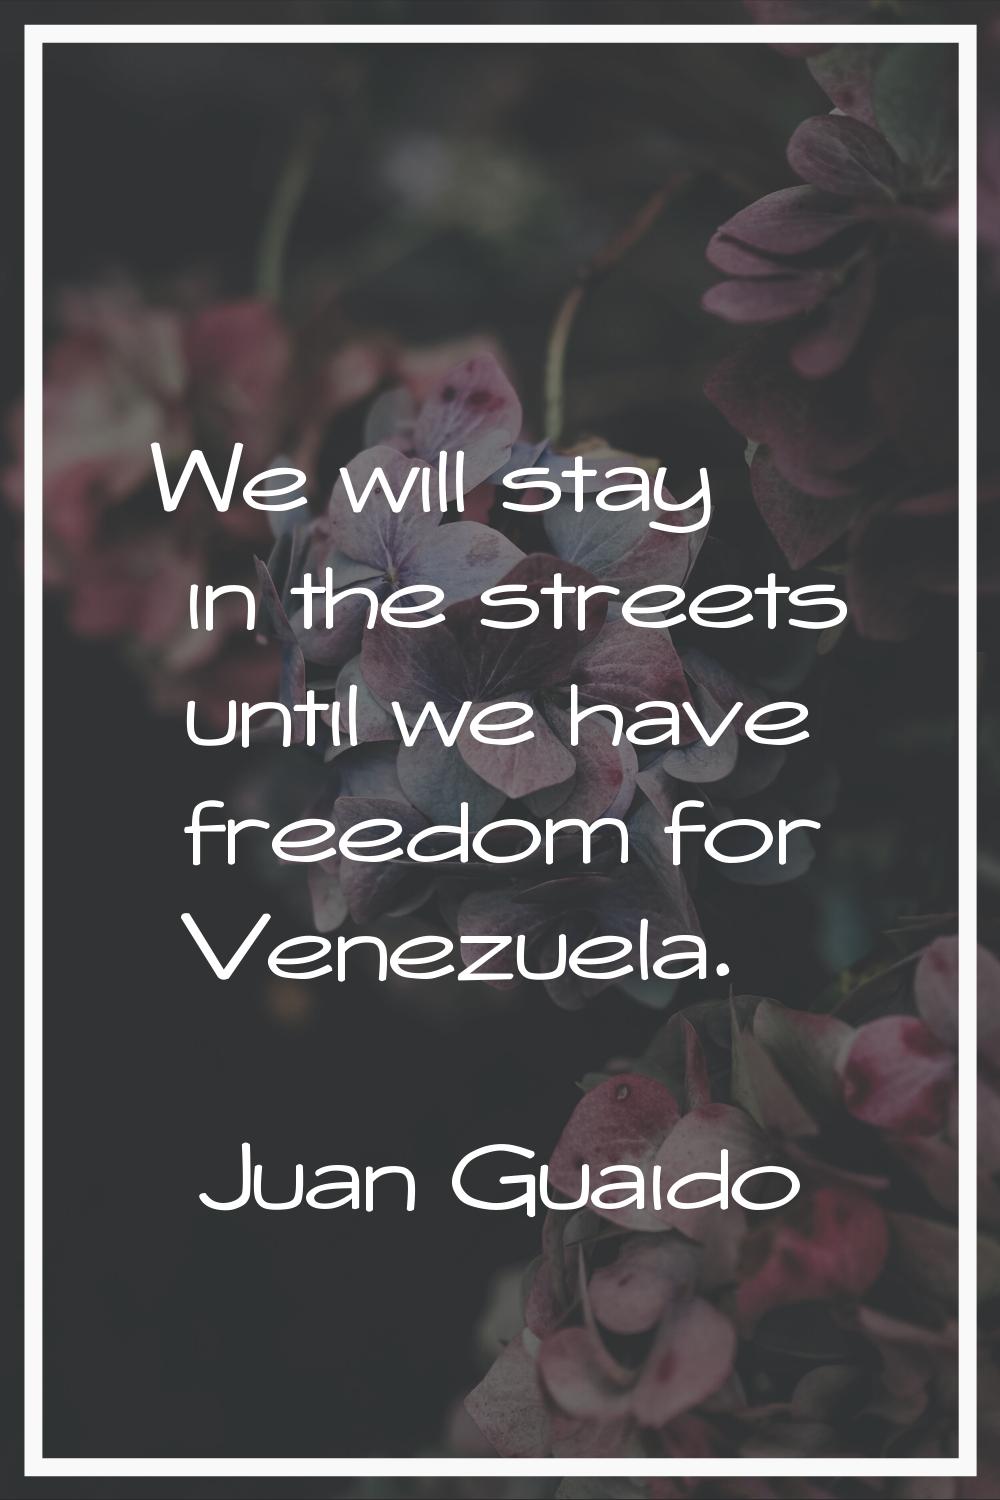 We will stay in the streets until we have freedom for Venezuela.